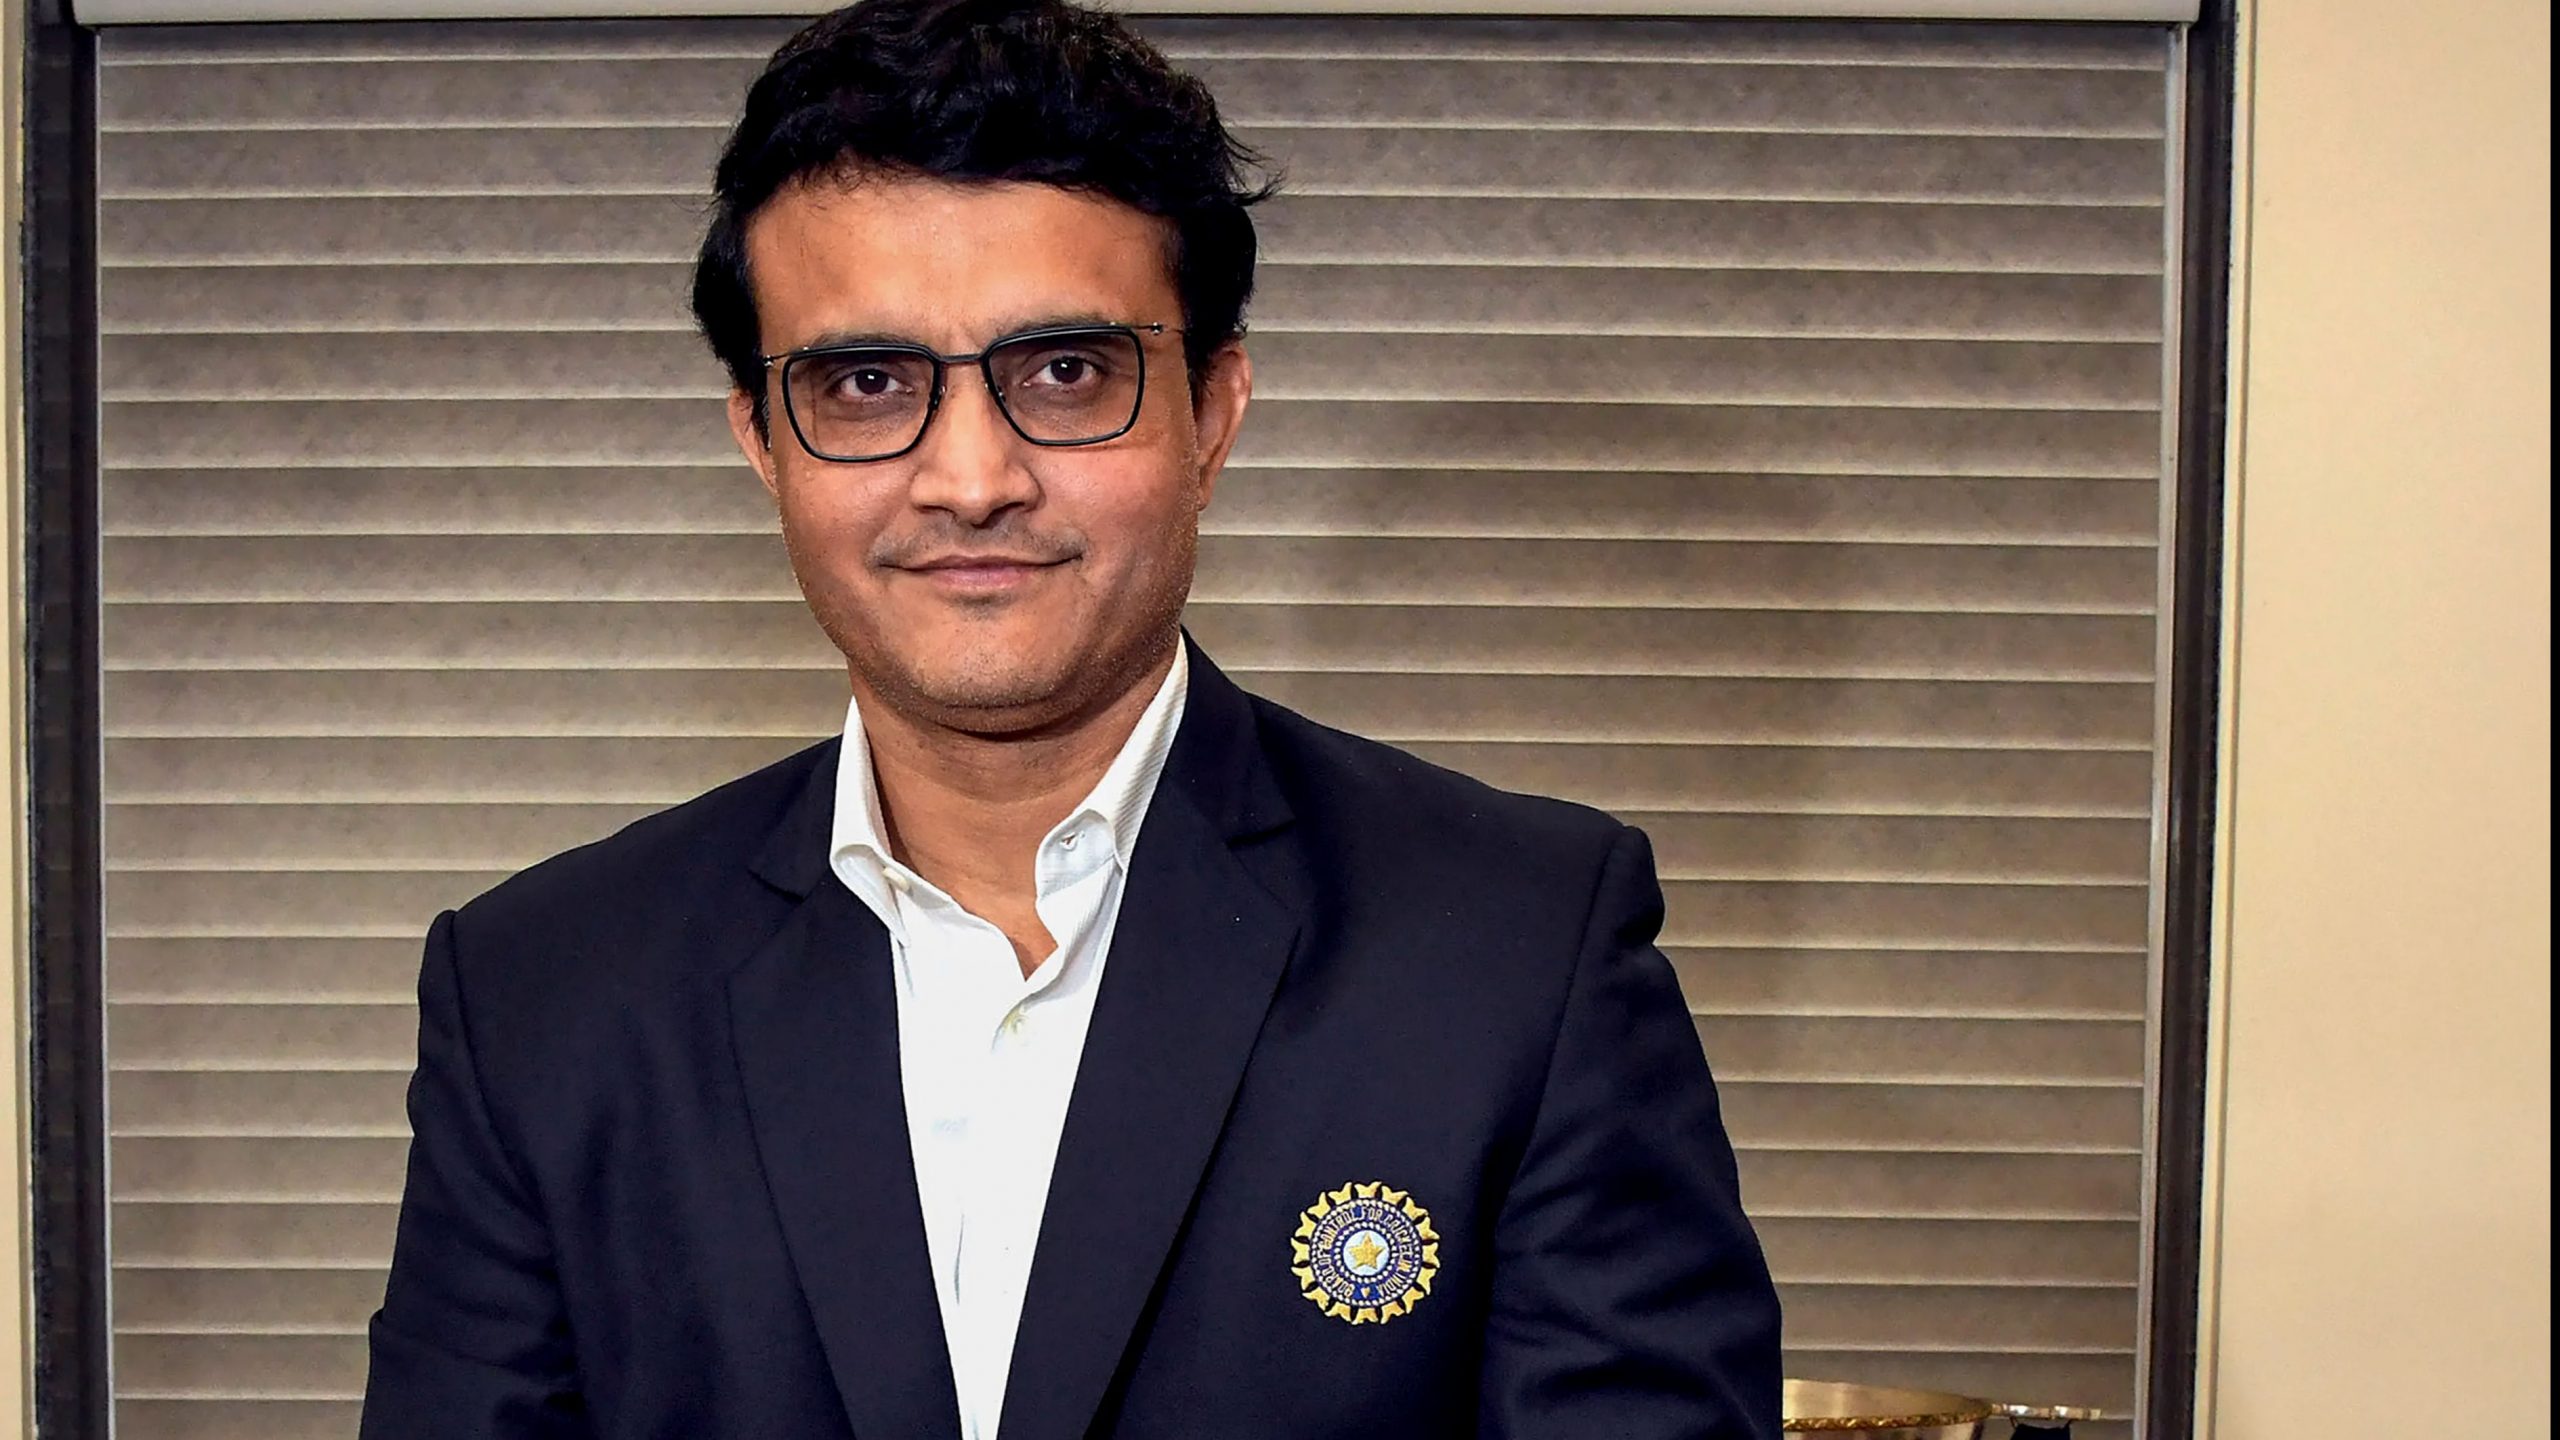 Remaining IPL games can’t be played in India: BCCI chief Sourav Ganguly